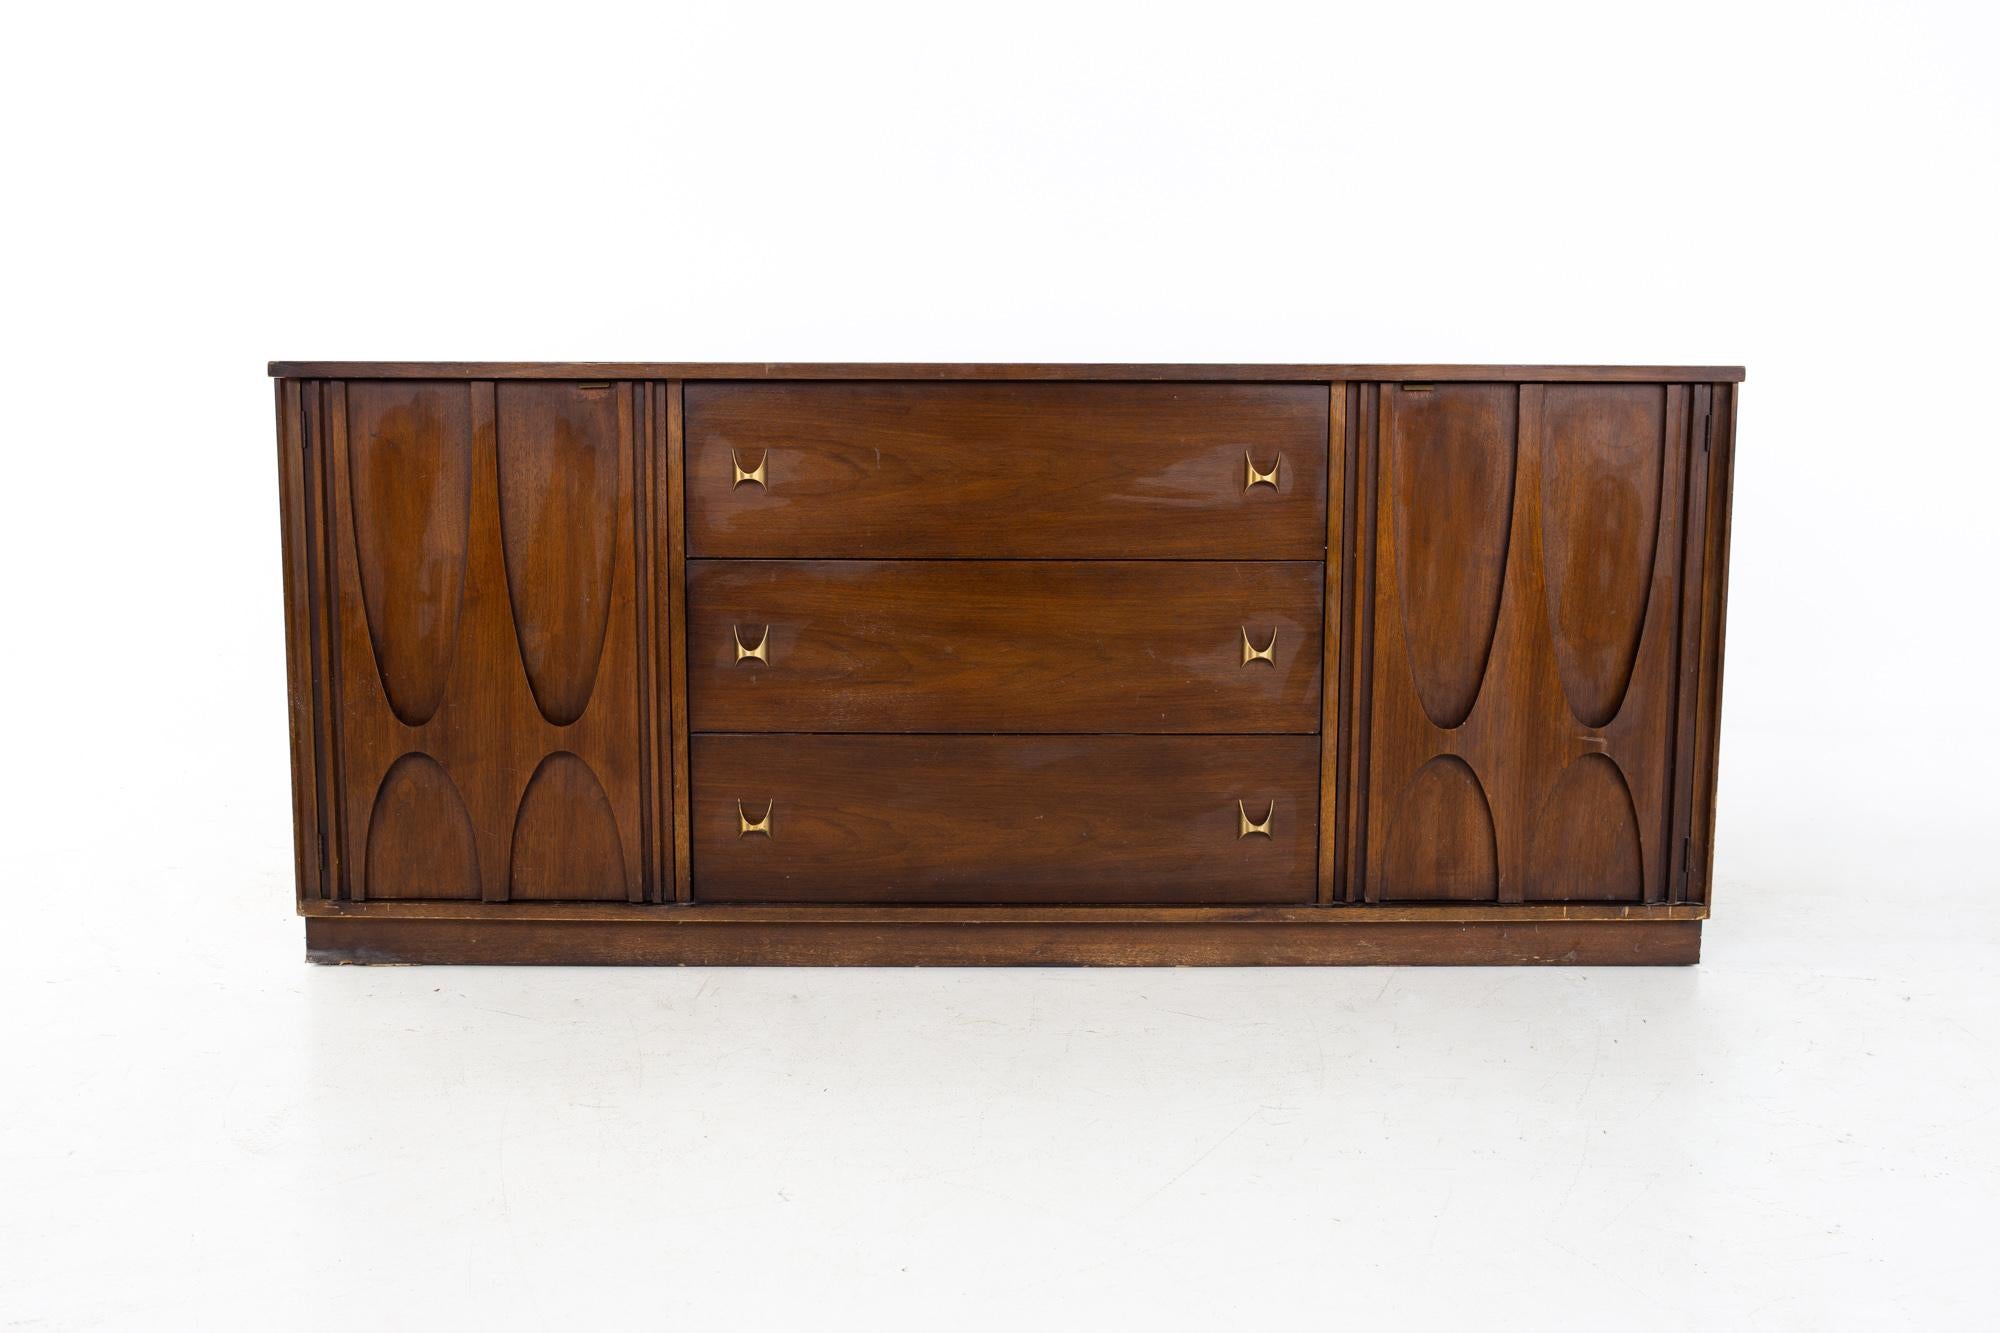 Broyhill Brasilia II Brutalist Mid Century Walnut 9 Drawer Lowboy Dresser

Dresser measures: 72 wide x 19 deep x 31 inches high

All pieces of furniture can be had in what we call restored vintage condition. That means the piece is restored upon